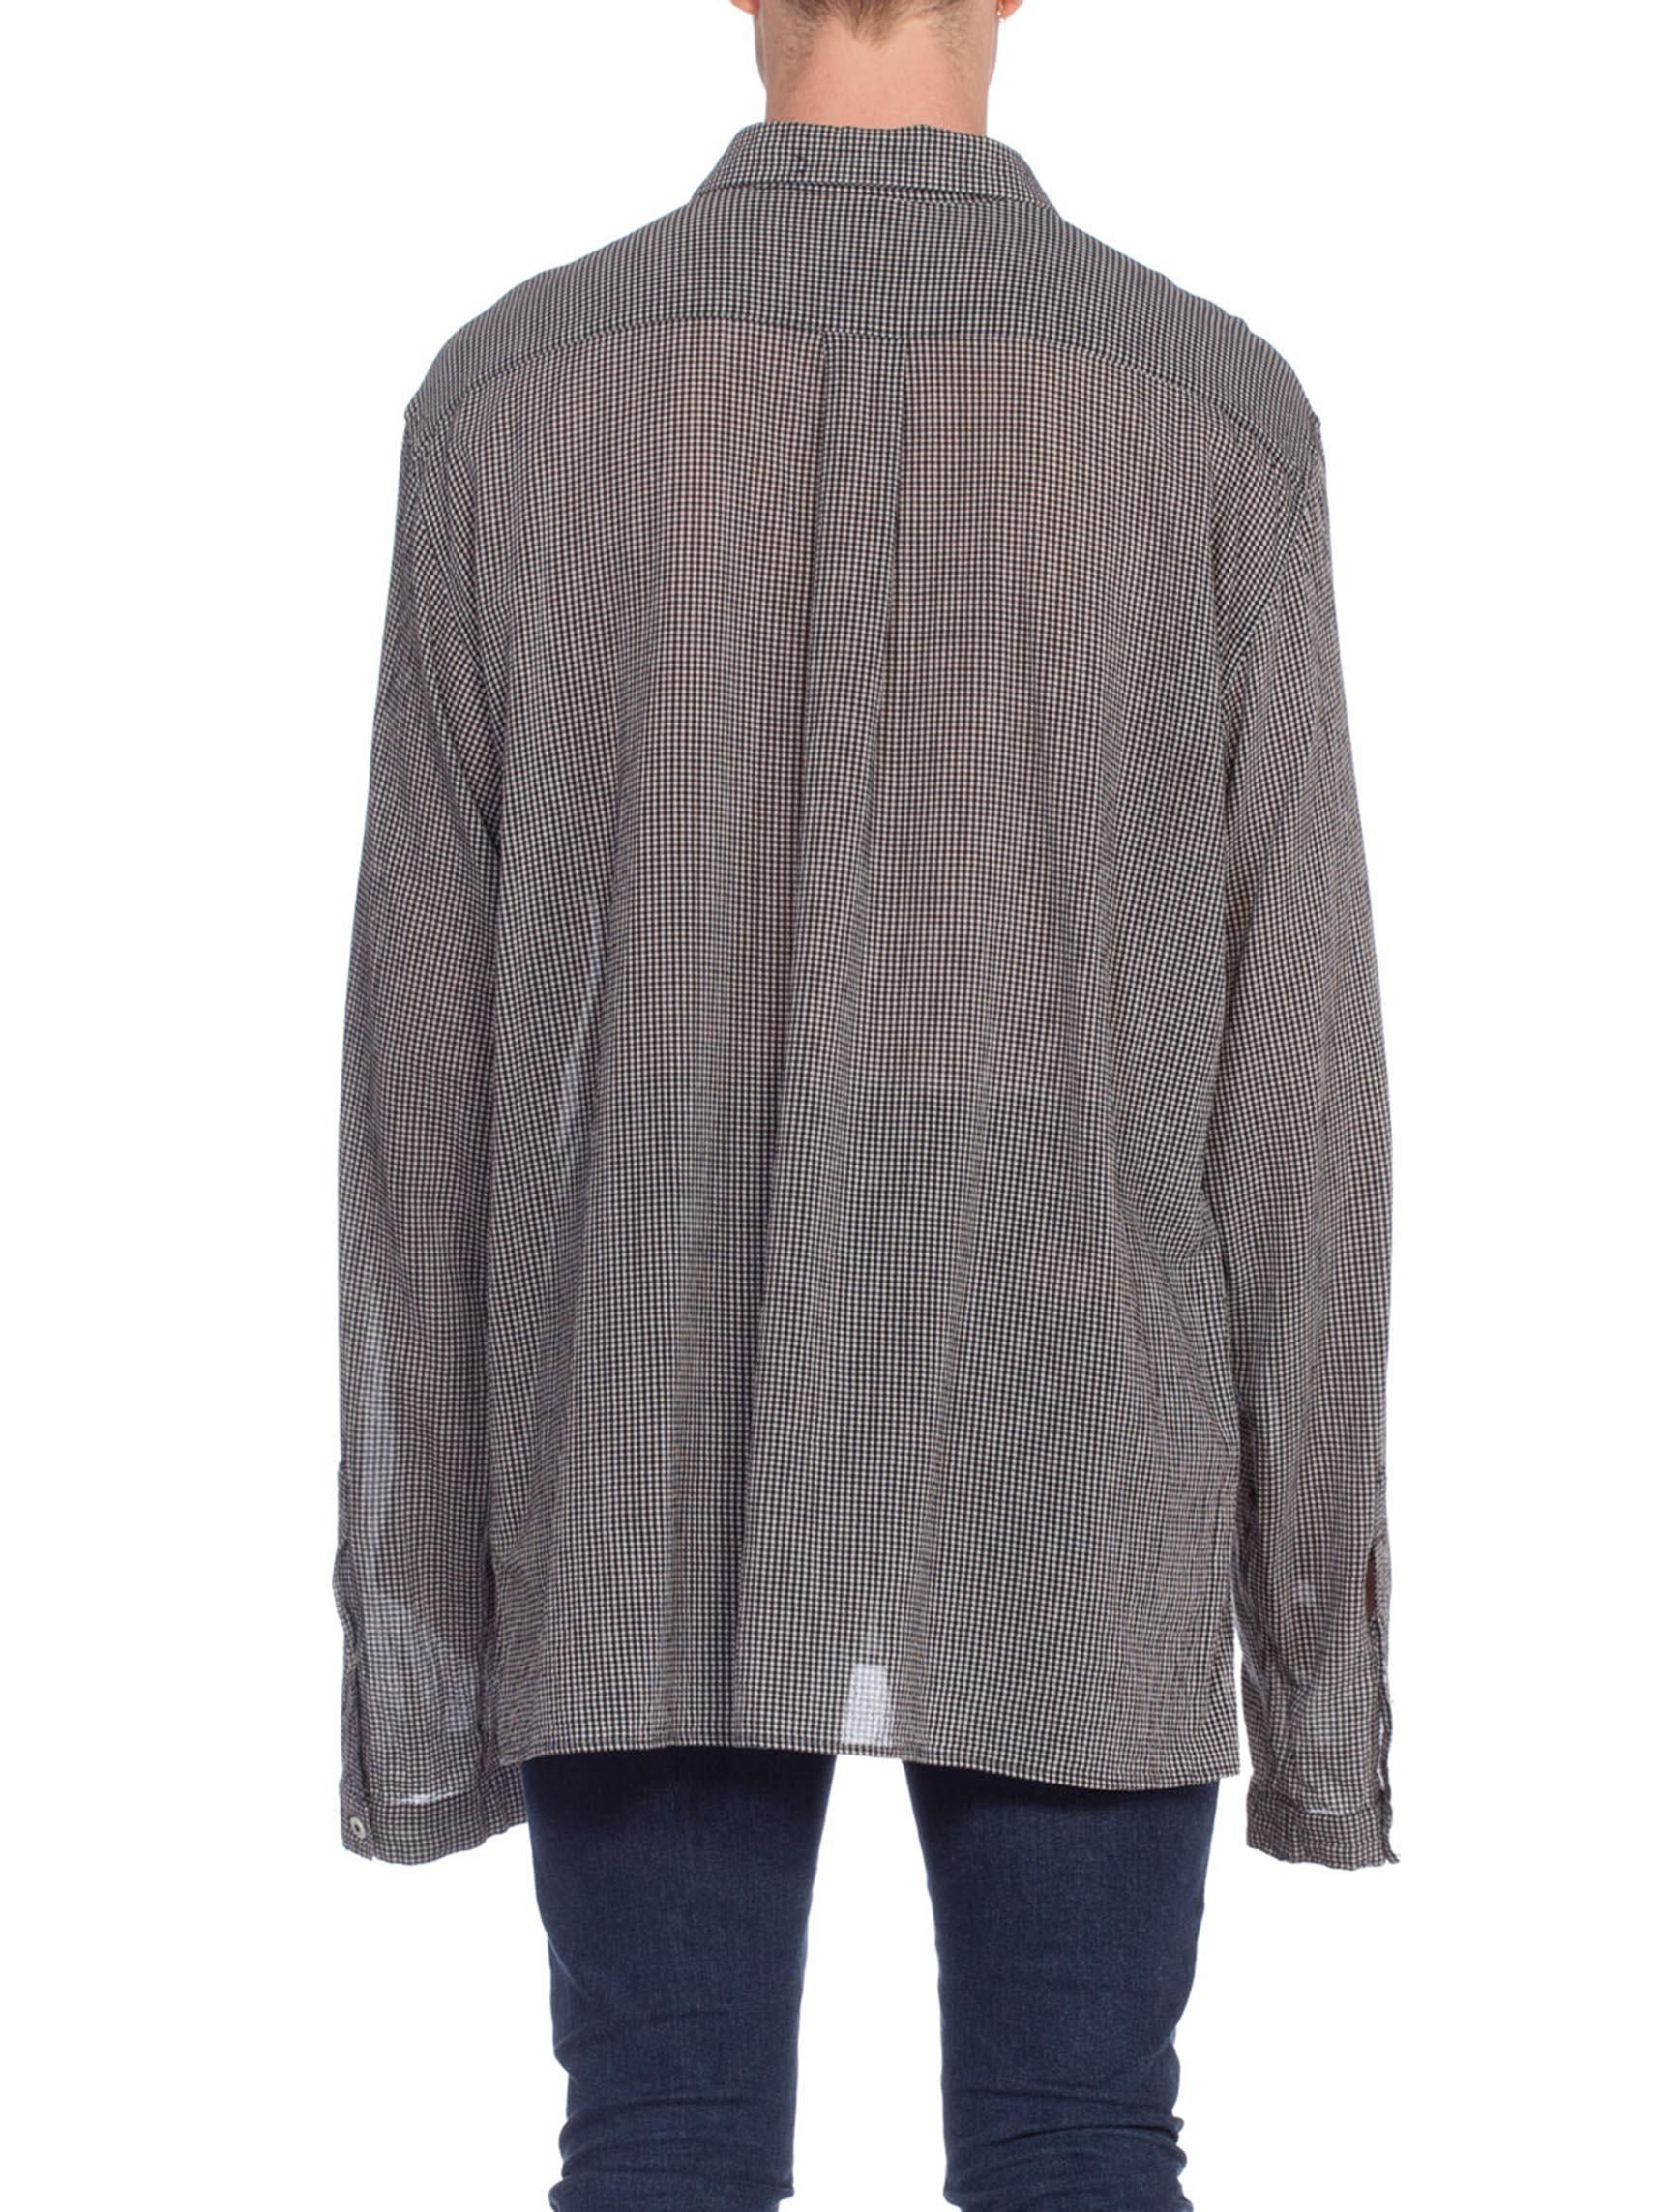 2000S ANN DEMEULEMEESTER Rayon Crepe Men's Oversized Bow Neck Shirt For Sale 3